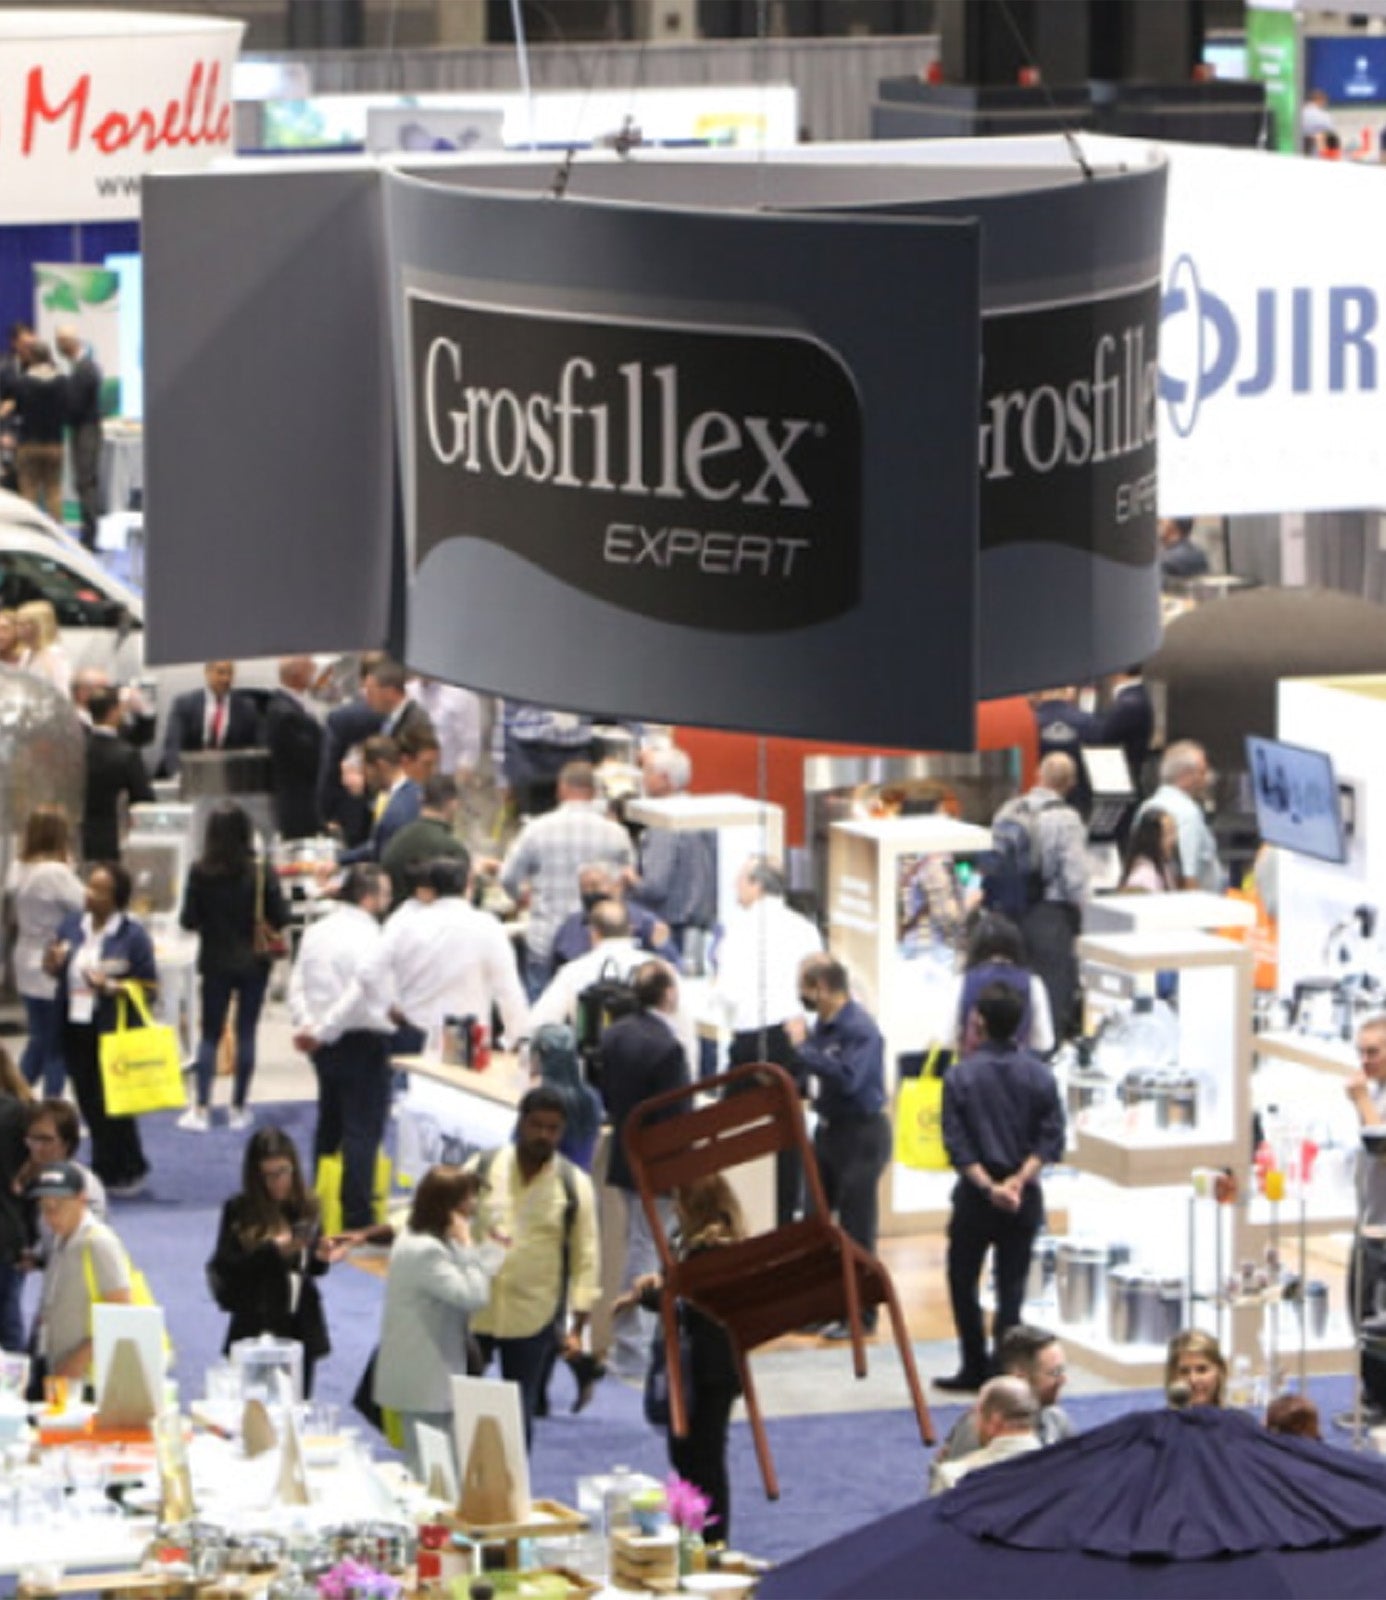 A Grosfillex sign hangs above the booth at a trade show event